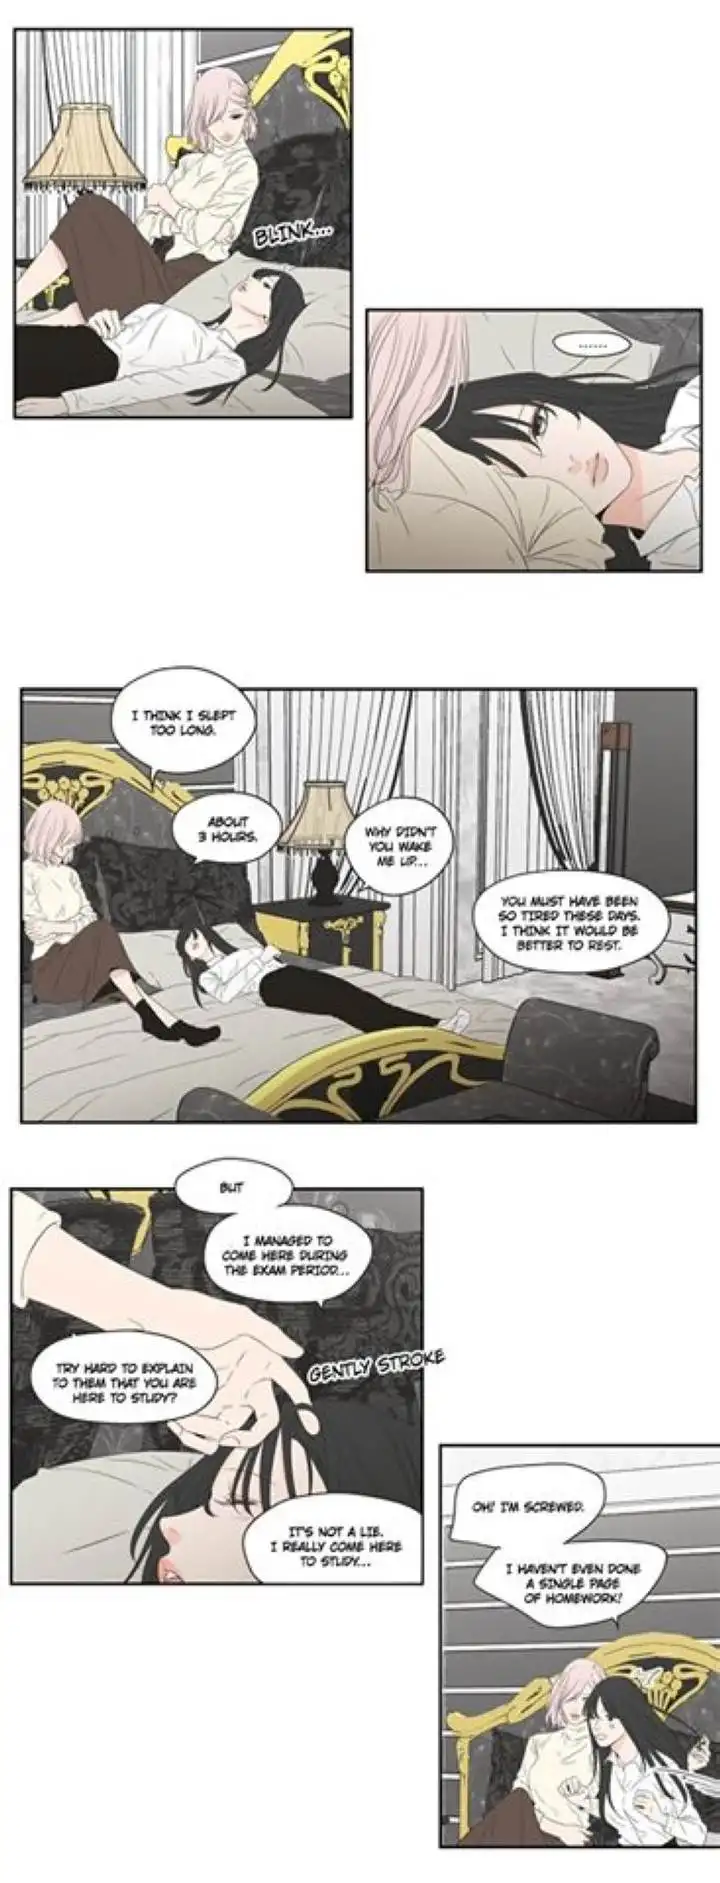 What Does the Fox Say? - Chapter 106.5 Page 5